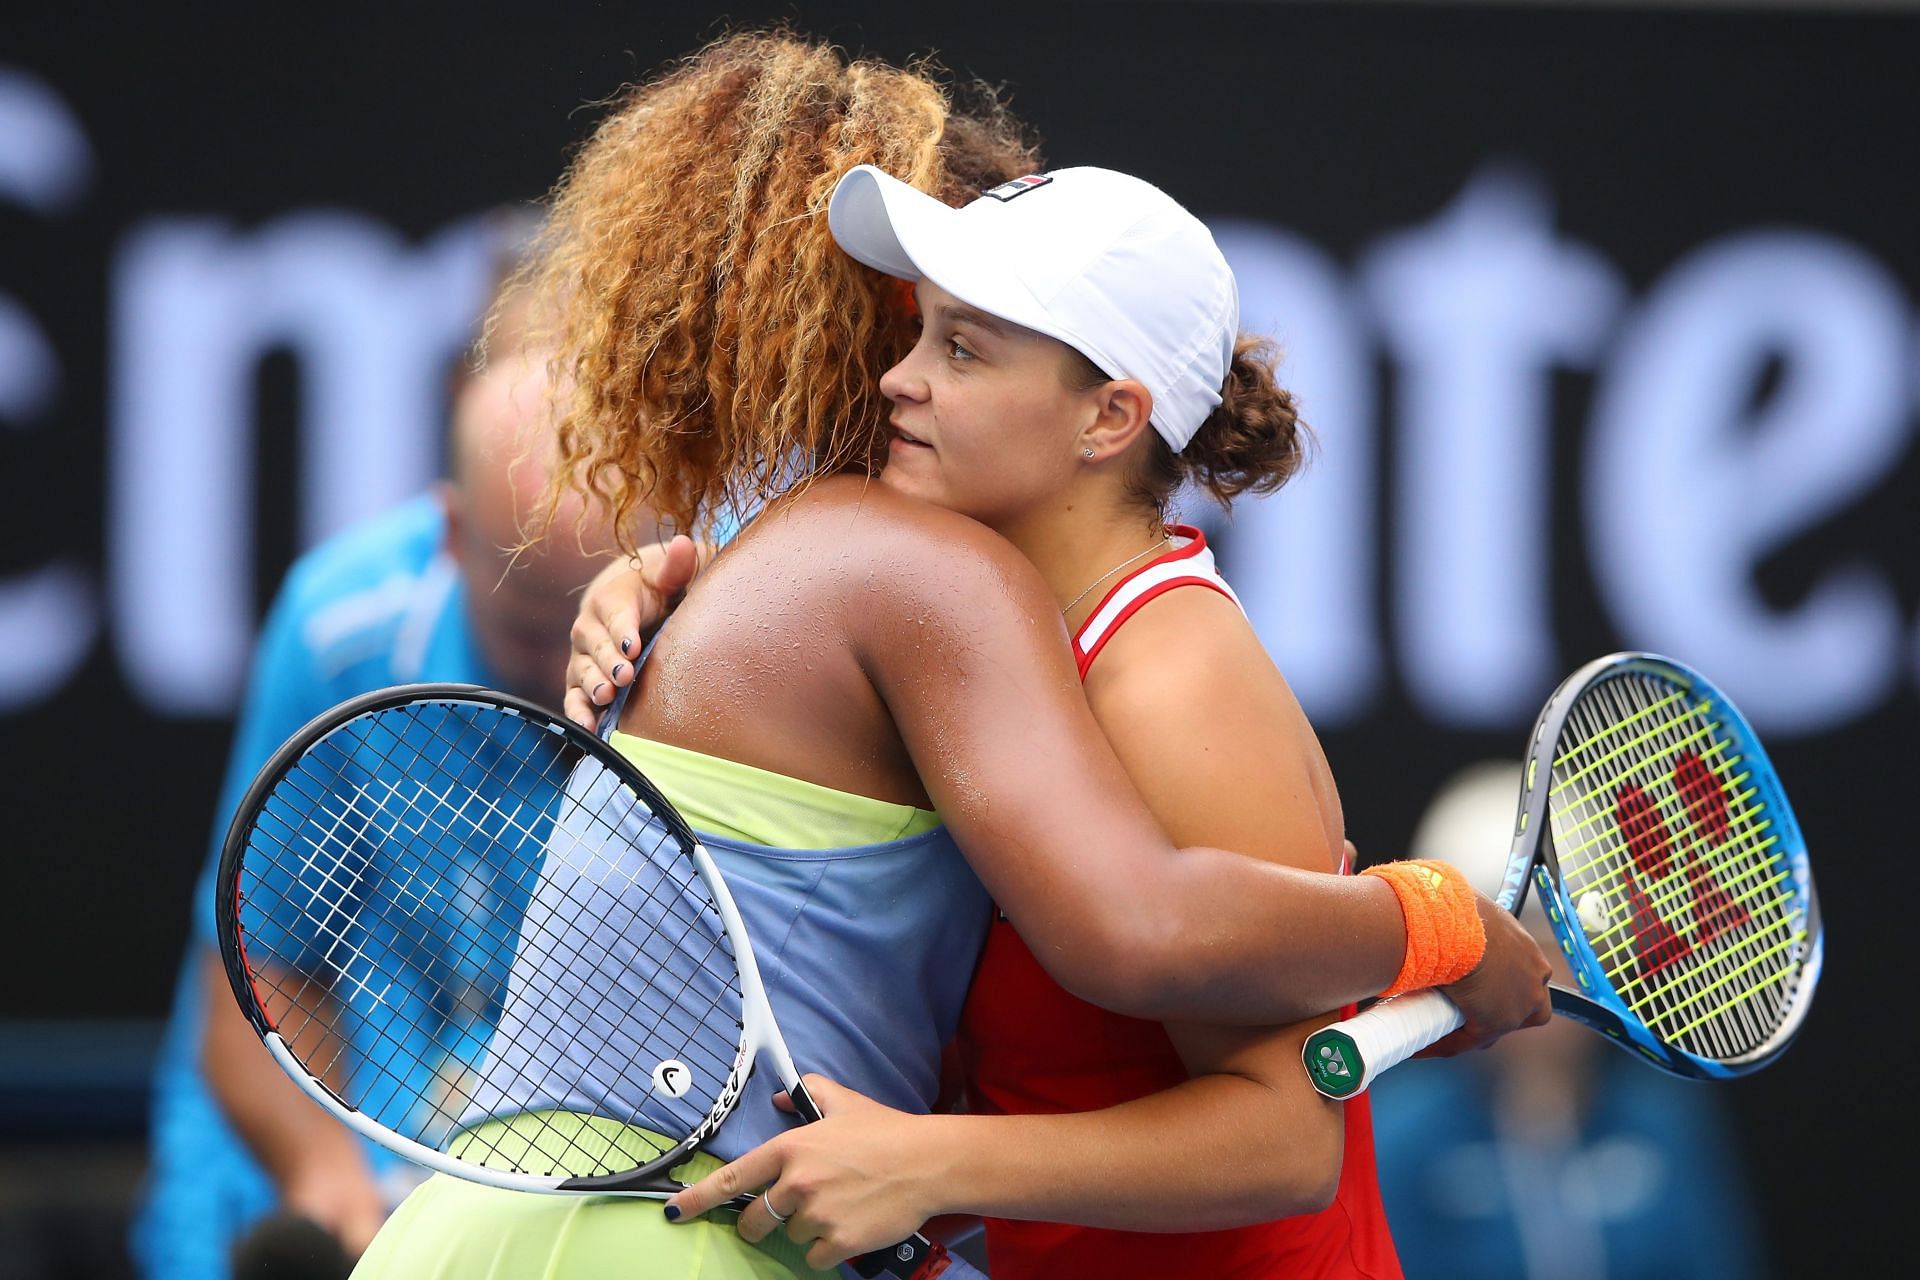 Former World No. 1s Naomi Osaka and Ashleigh Barty announce pregnancy just days apart